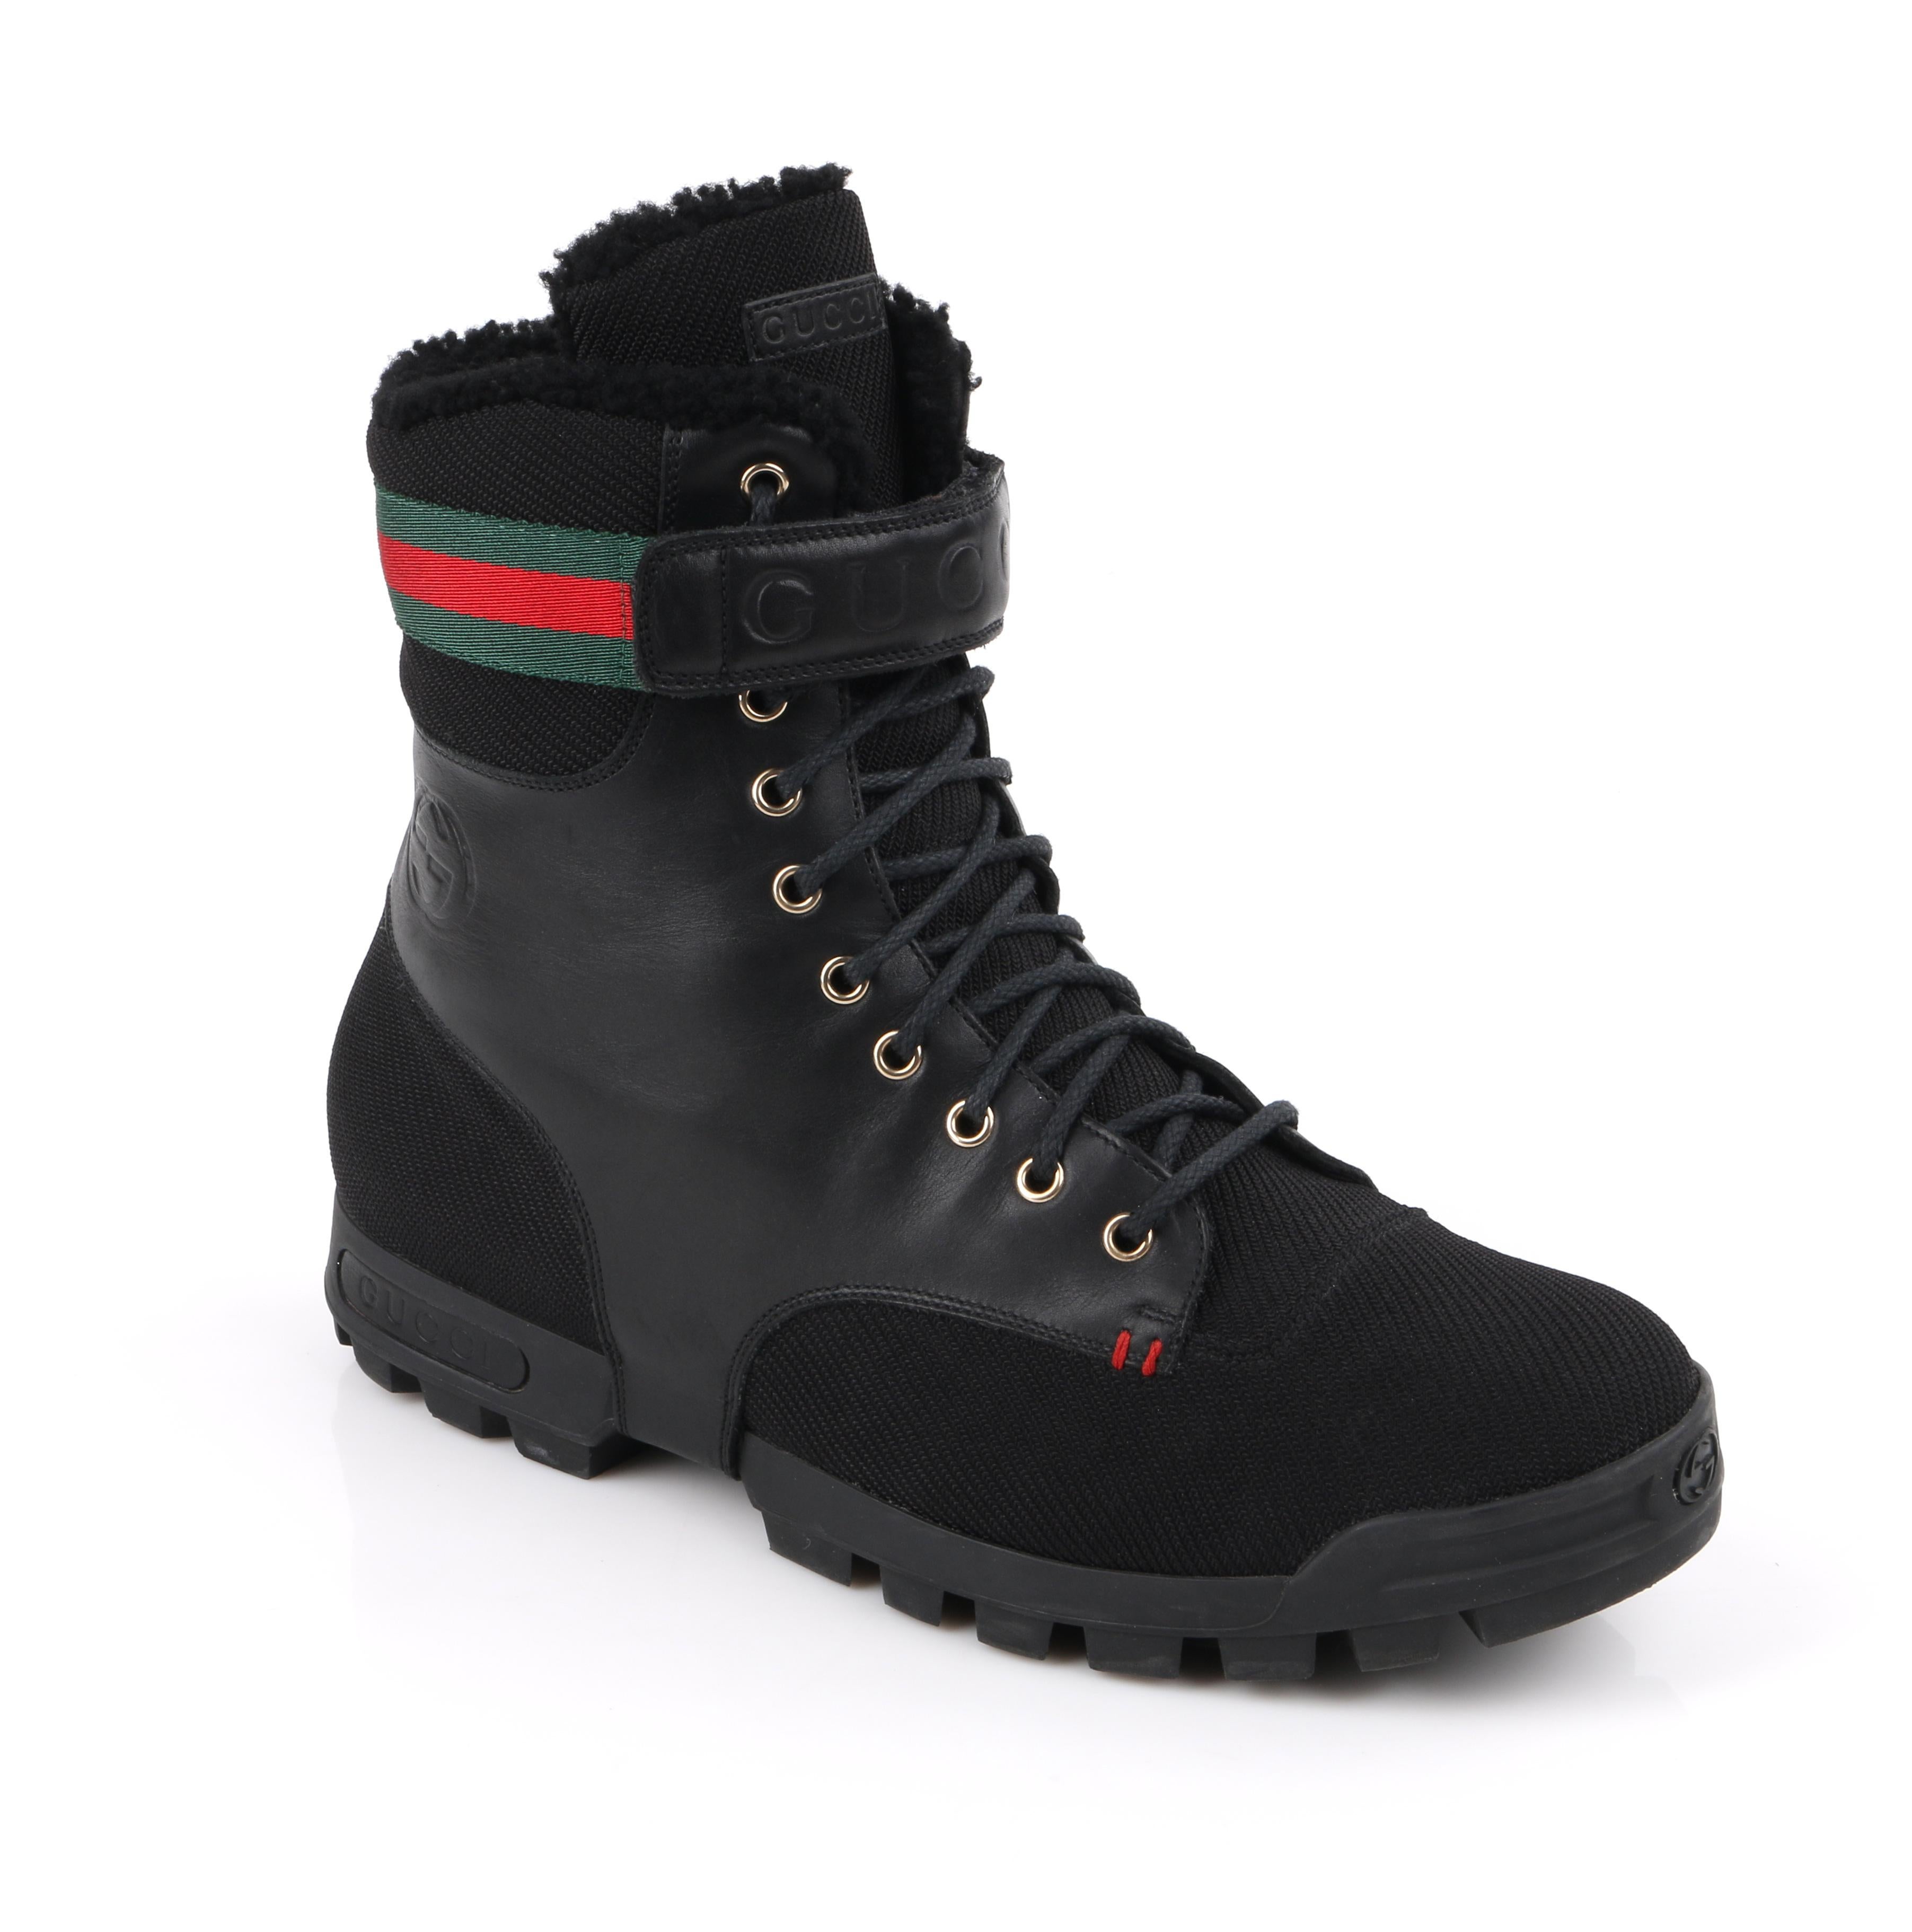 DESCRIPTION: GUCCI Black Leather Signature Webbing Shearling Lined Combat Boots
 
Brand / Manufacturer: Gucci
Collection: 
Designer:
Manufacturer Style Name: 
Style: Combat boots
Color(s): Black, green, and red
Marked Materials: Upper: Leather and